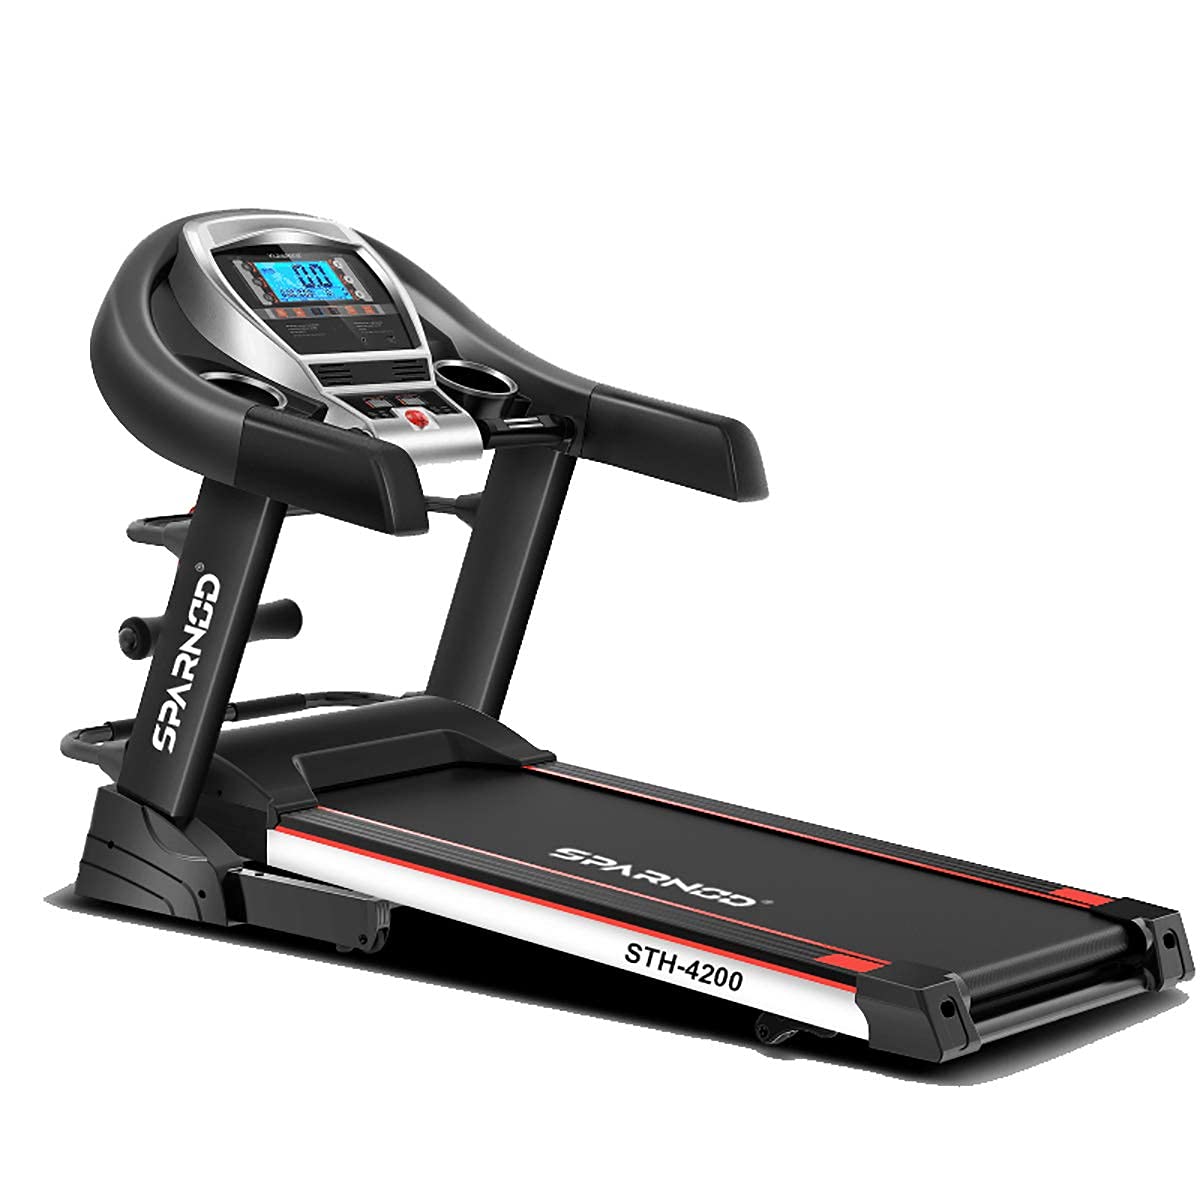 sparnod fitness STH 4200 review